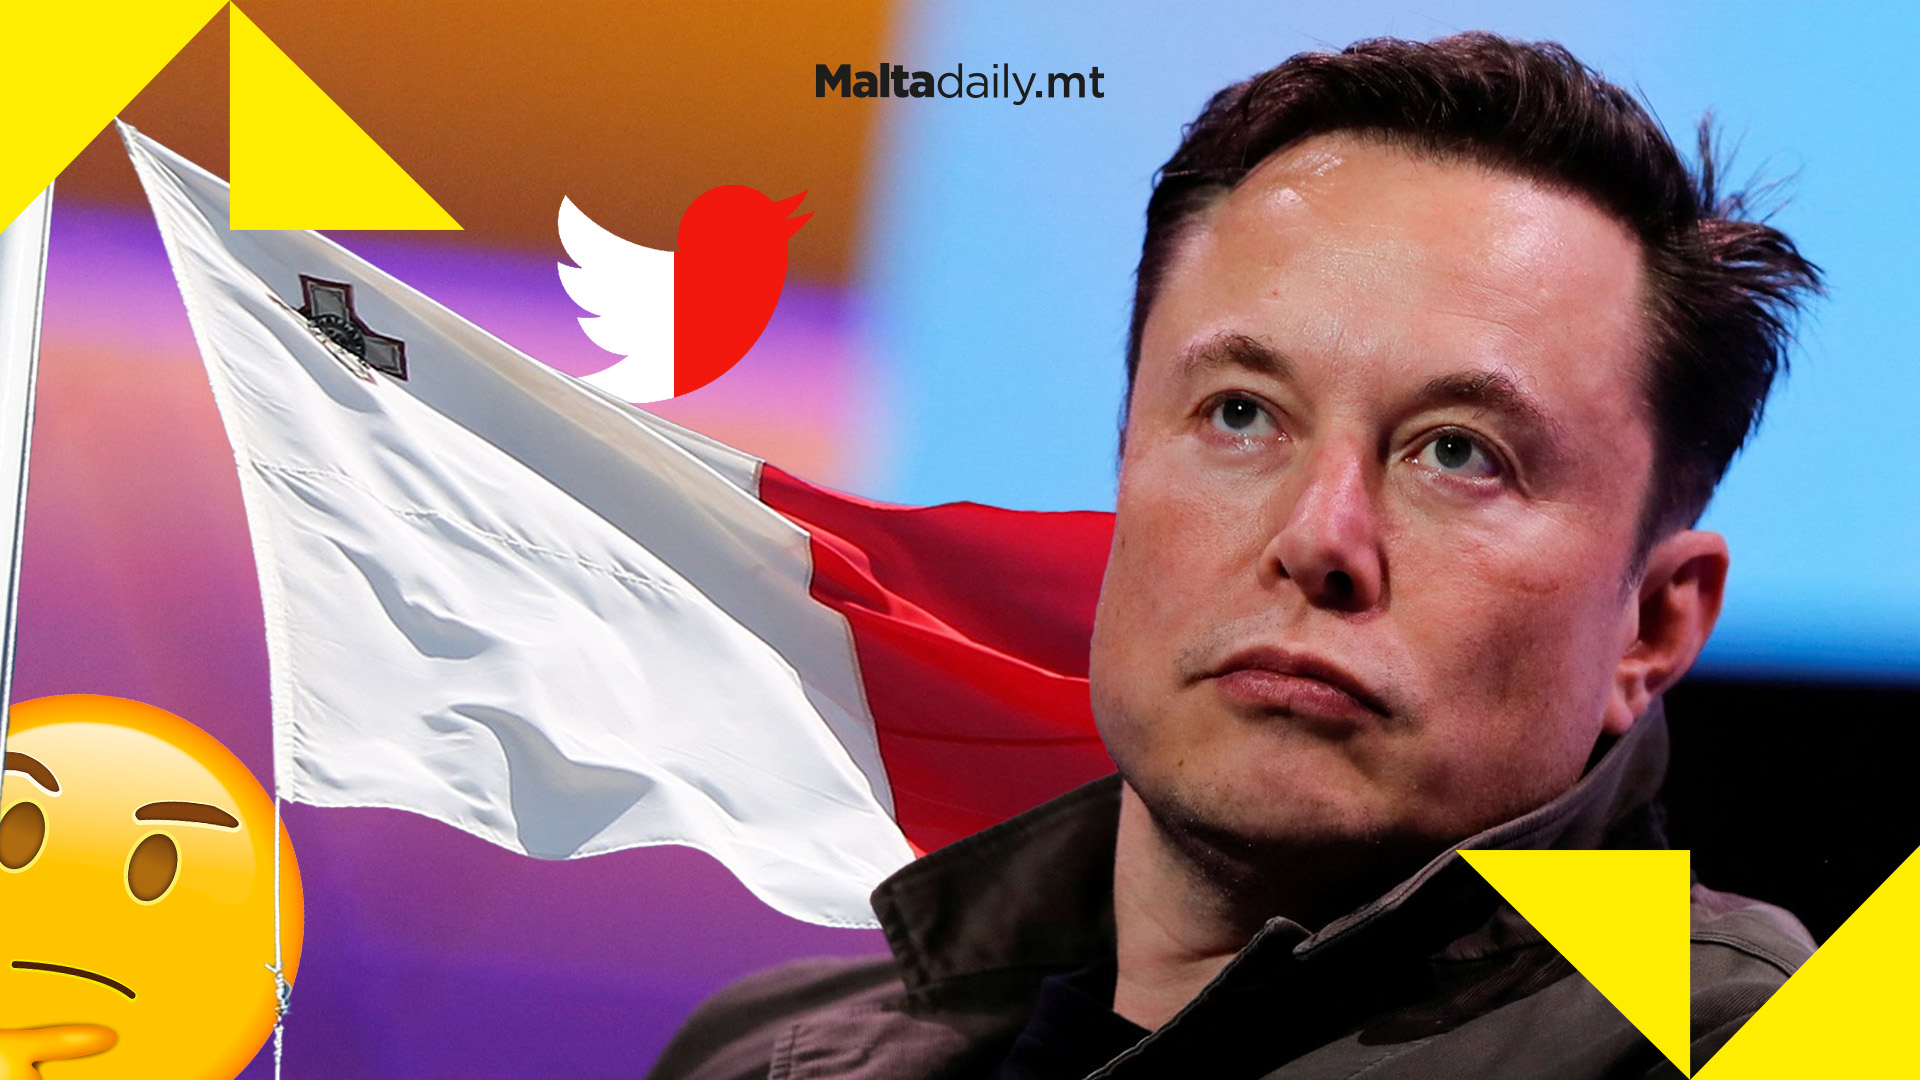 5 Maltese companies that Elon Musk could buy after Twitter